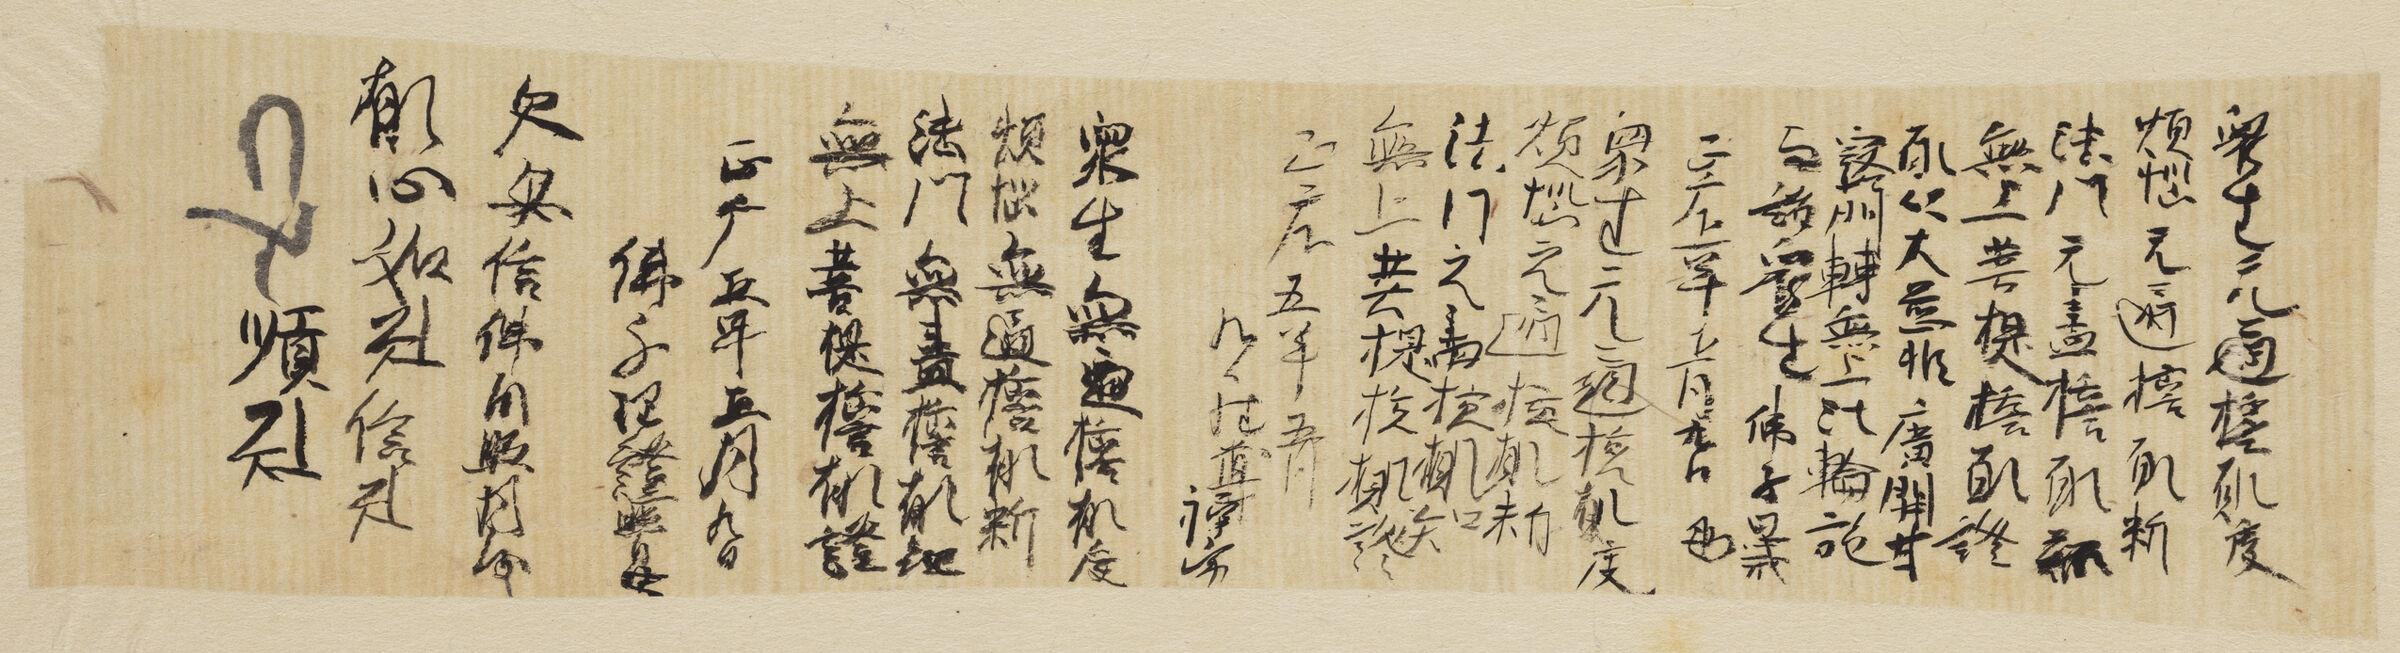 One Of Four Sheets Of Paper Inscribed With Religious Texts, Poems, Charms [Mounted On A Board]